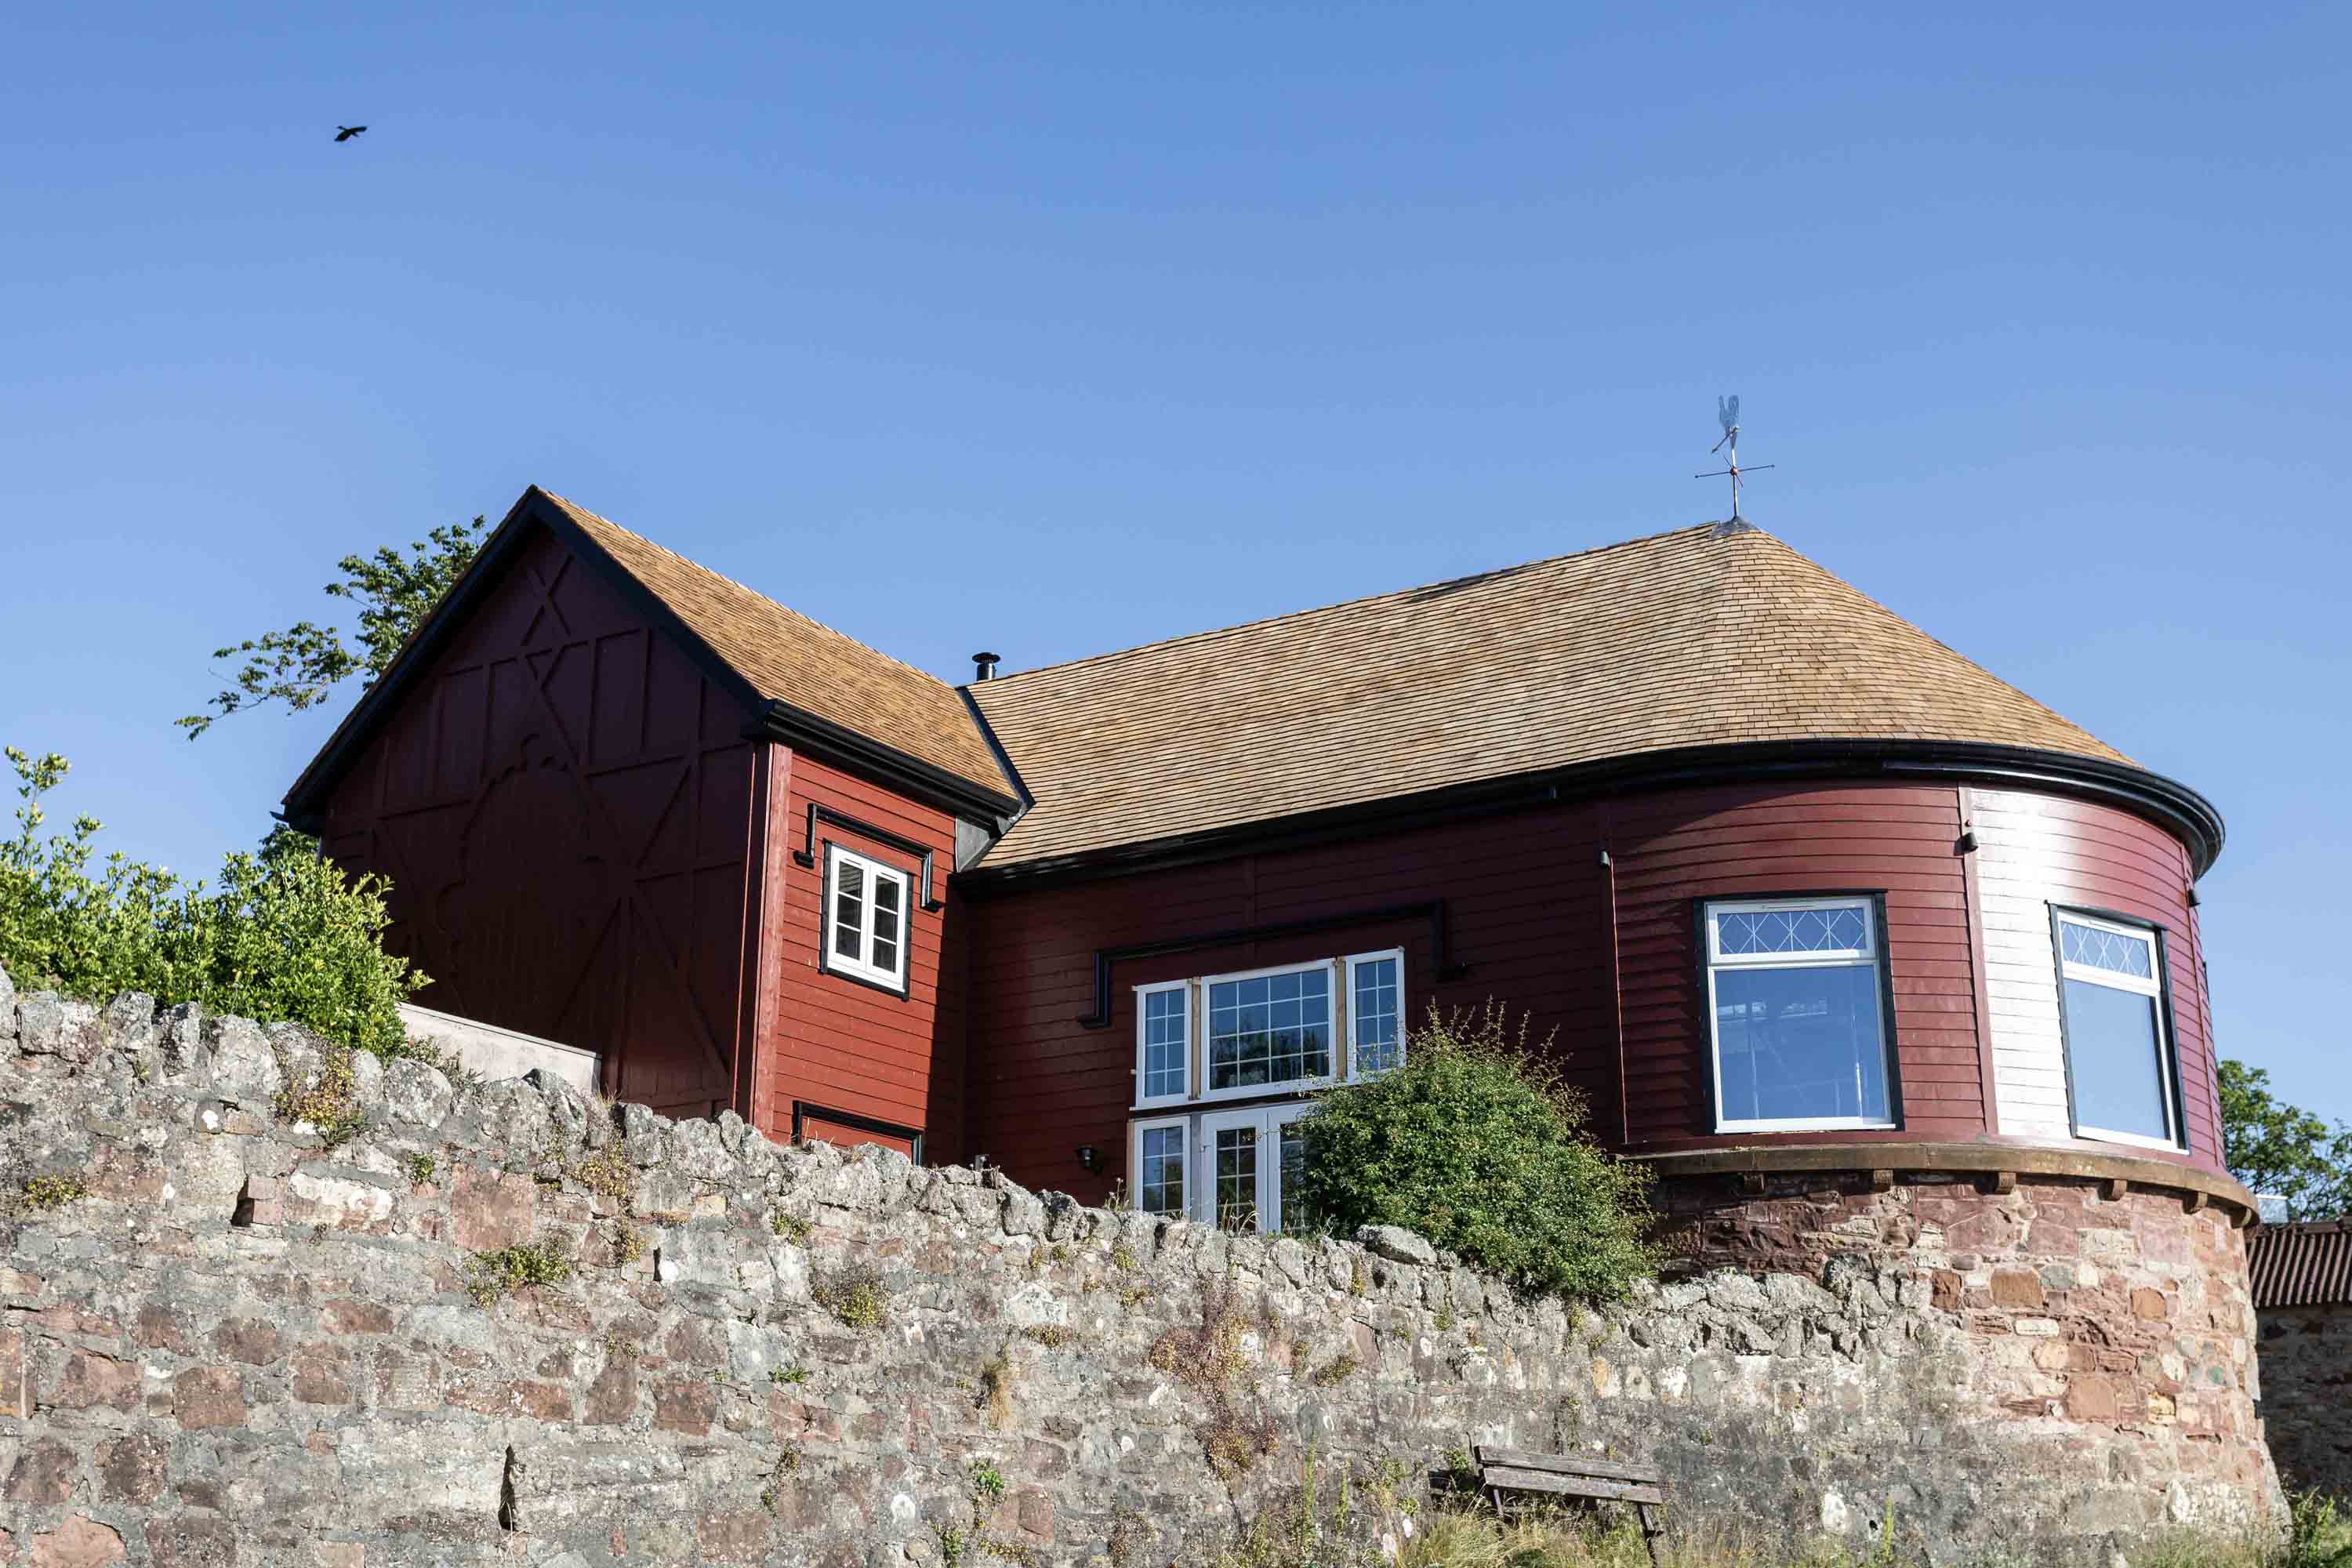 A house overlooking a cliff with a cedar shingle roof.